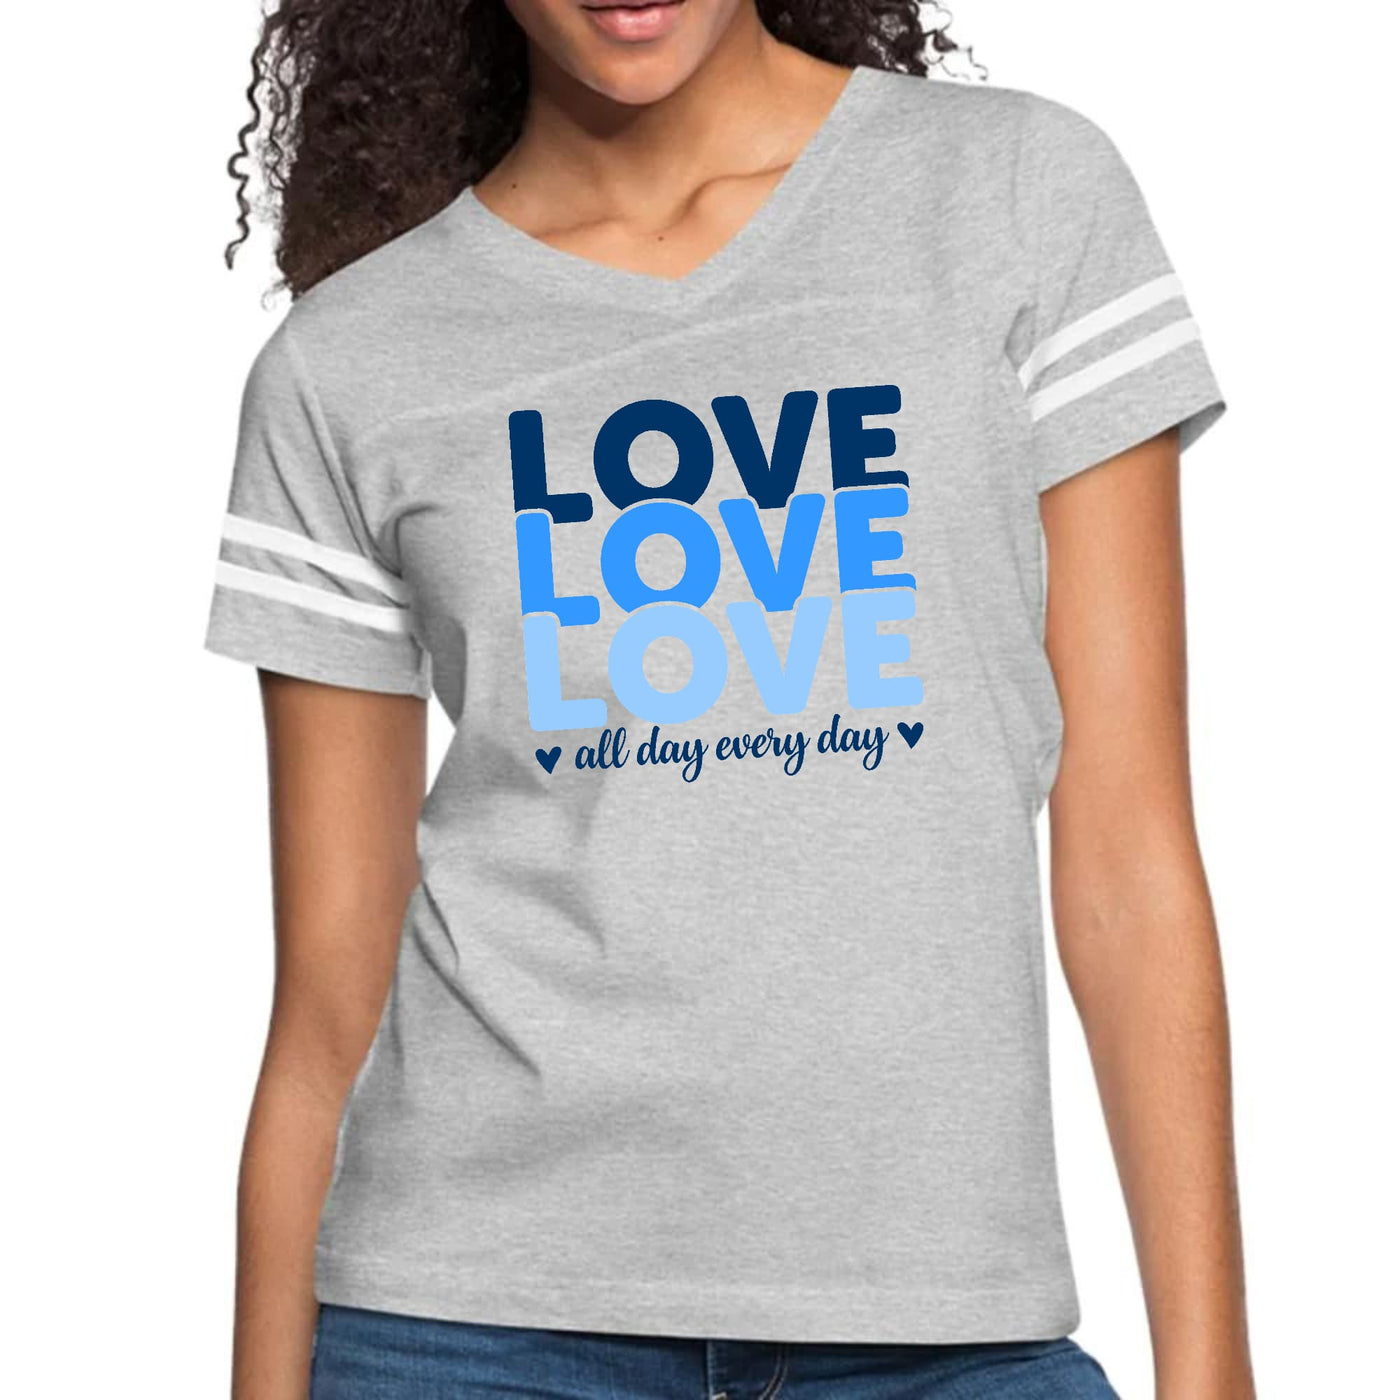 Womens Vintage Sport Graphic T-shirt Love All Day Every Day Blue - Womens